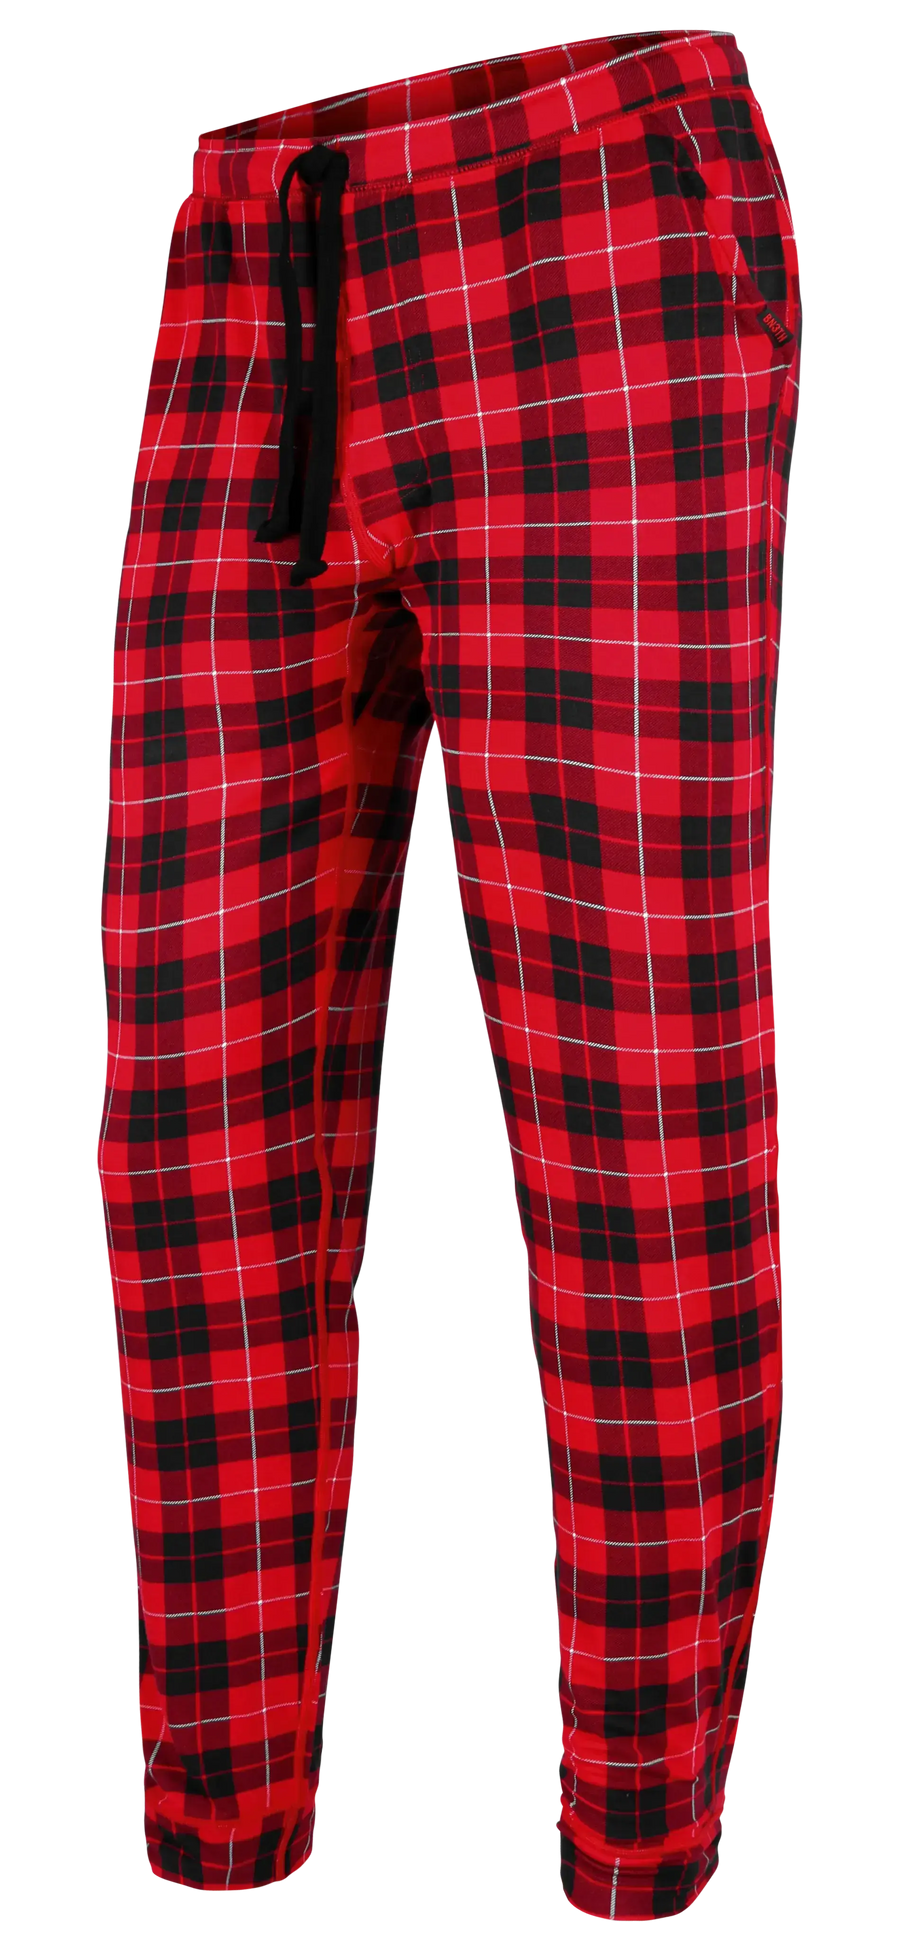 BN3TH | SLEEPWEAR | Fireside Plaid Red Brothers Clothing Co.